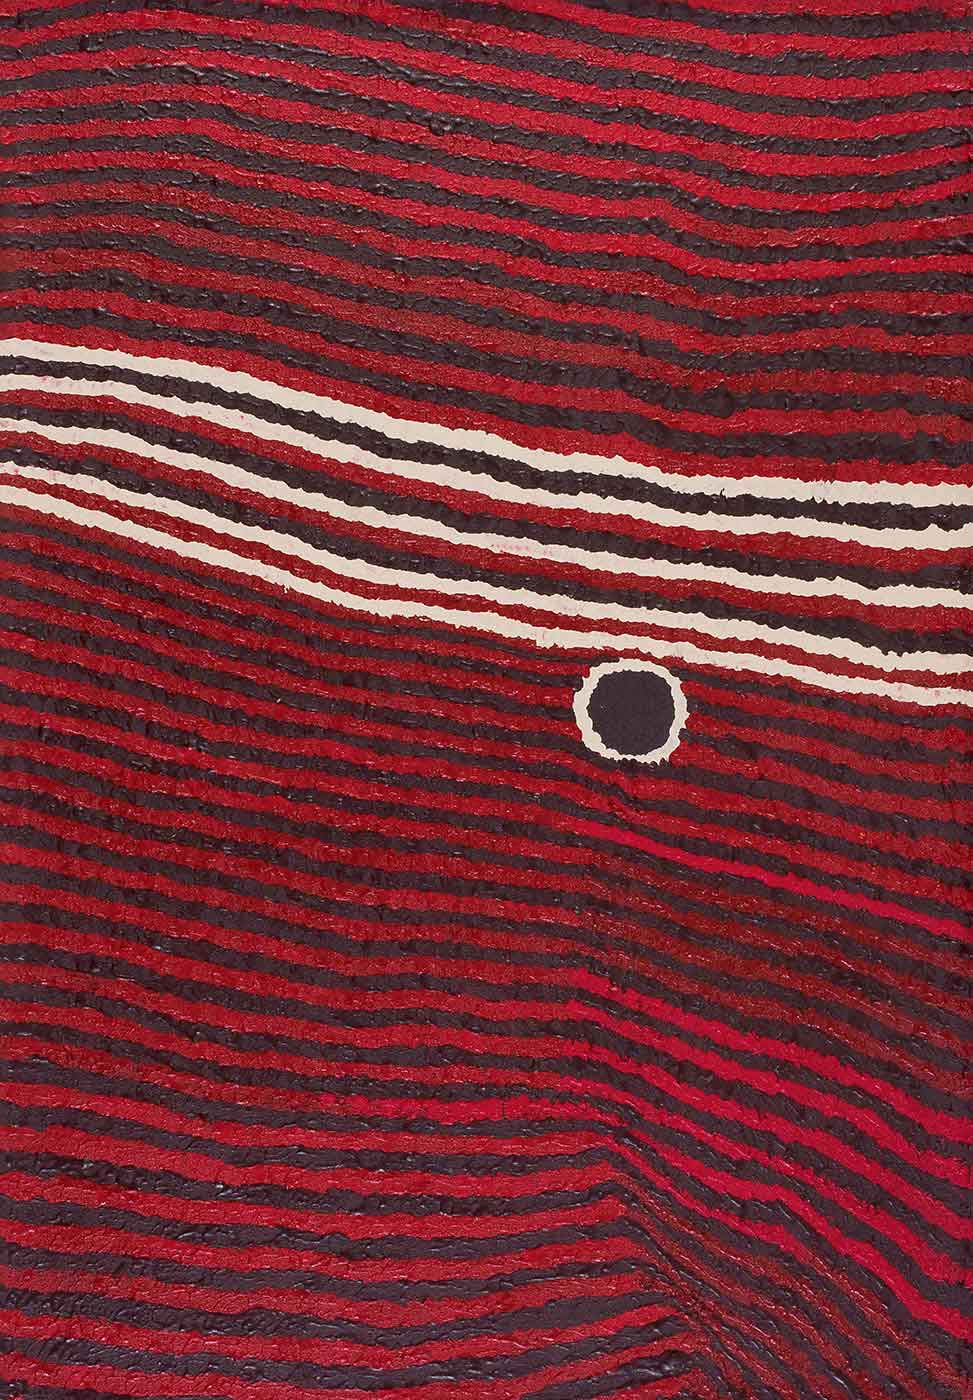 A red and black horizontal striped painting on linen with a red, cream and black horizontal striped section across the centre. Beneath the cream stripes there is a black disc with a cream edge. The stripes start to veer downwards to the right underneath the disc.  - click to view larger image